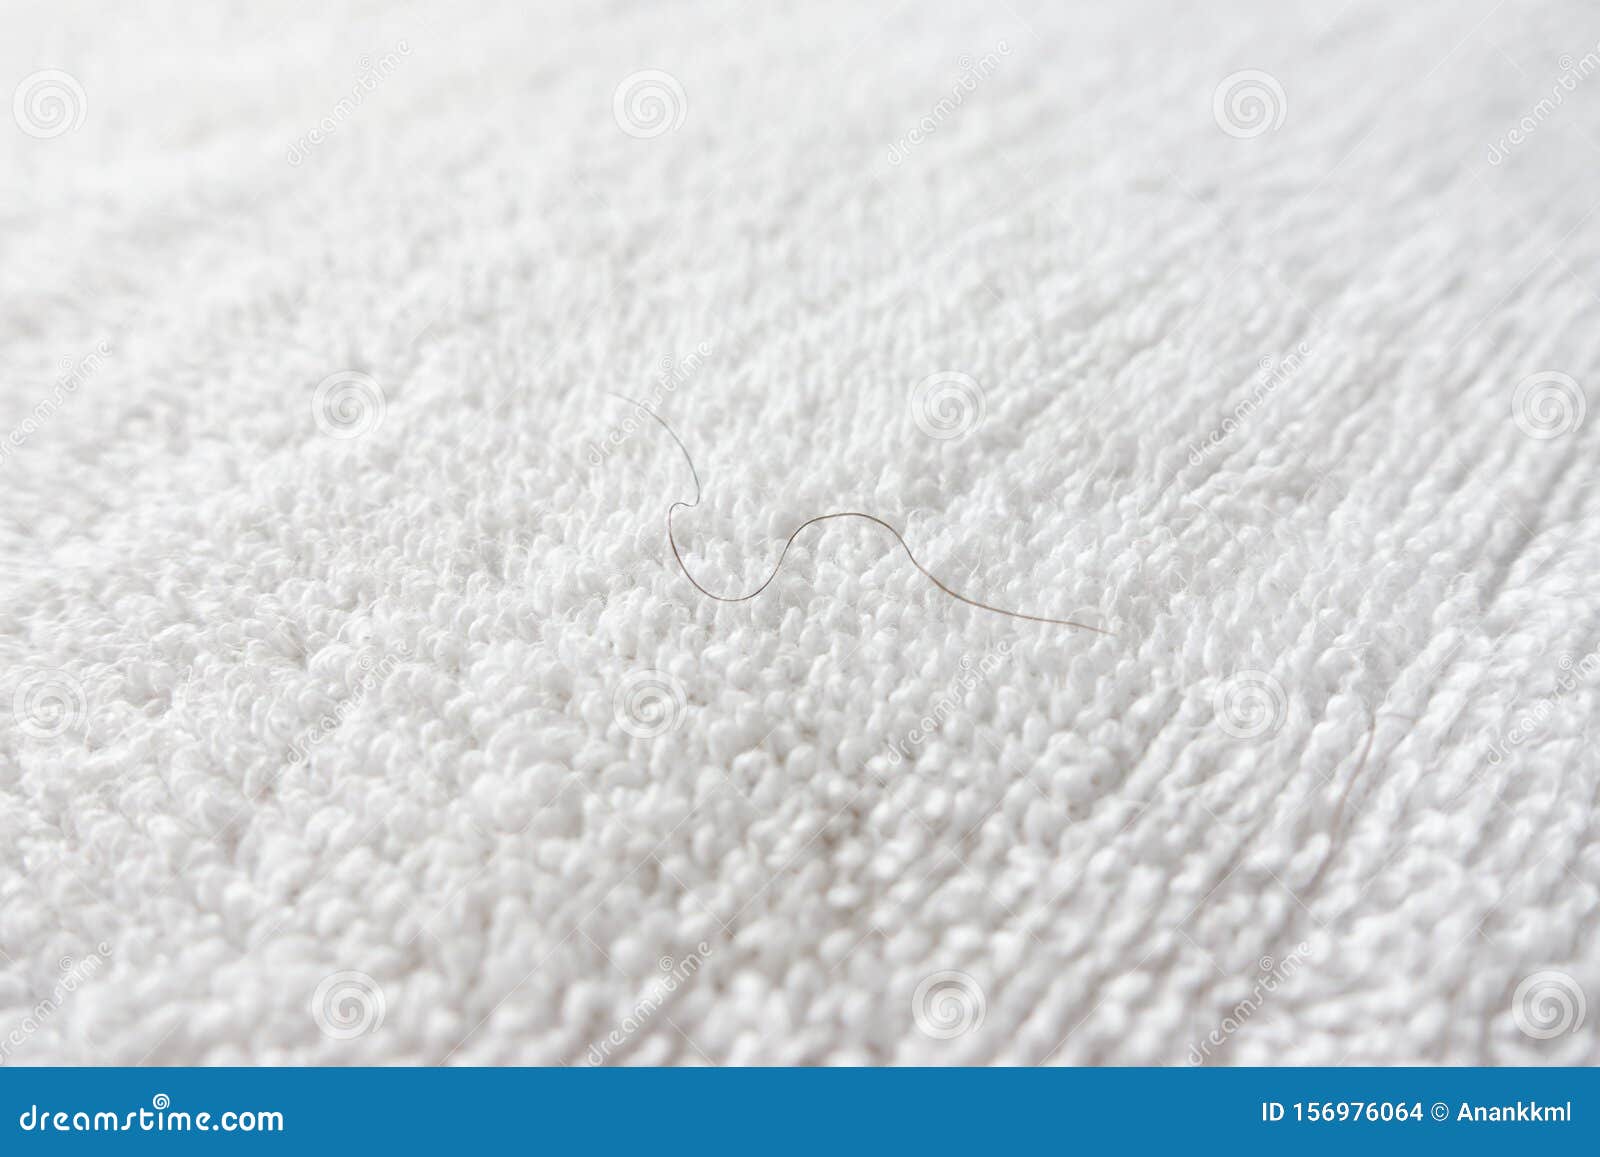 Pubic hair on white towel stock photo. Image of floor - 156976064